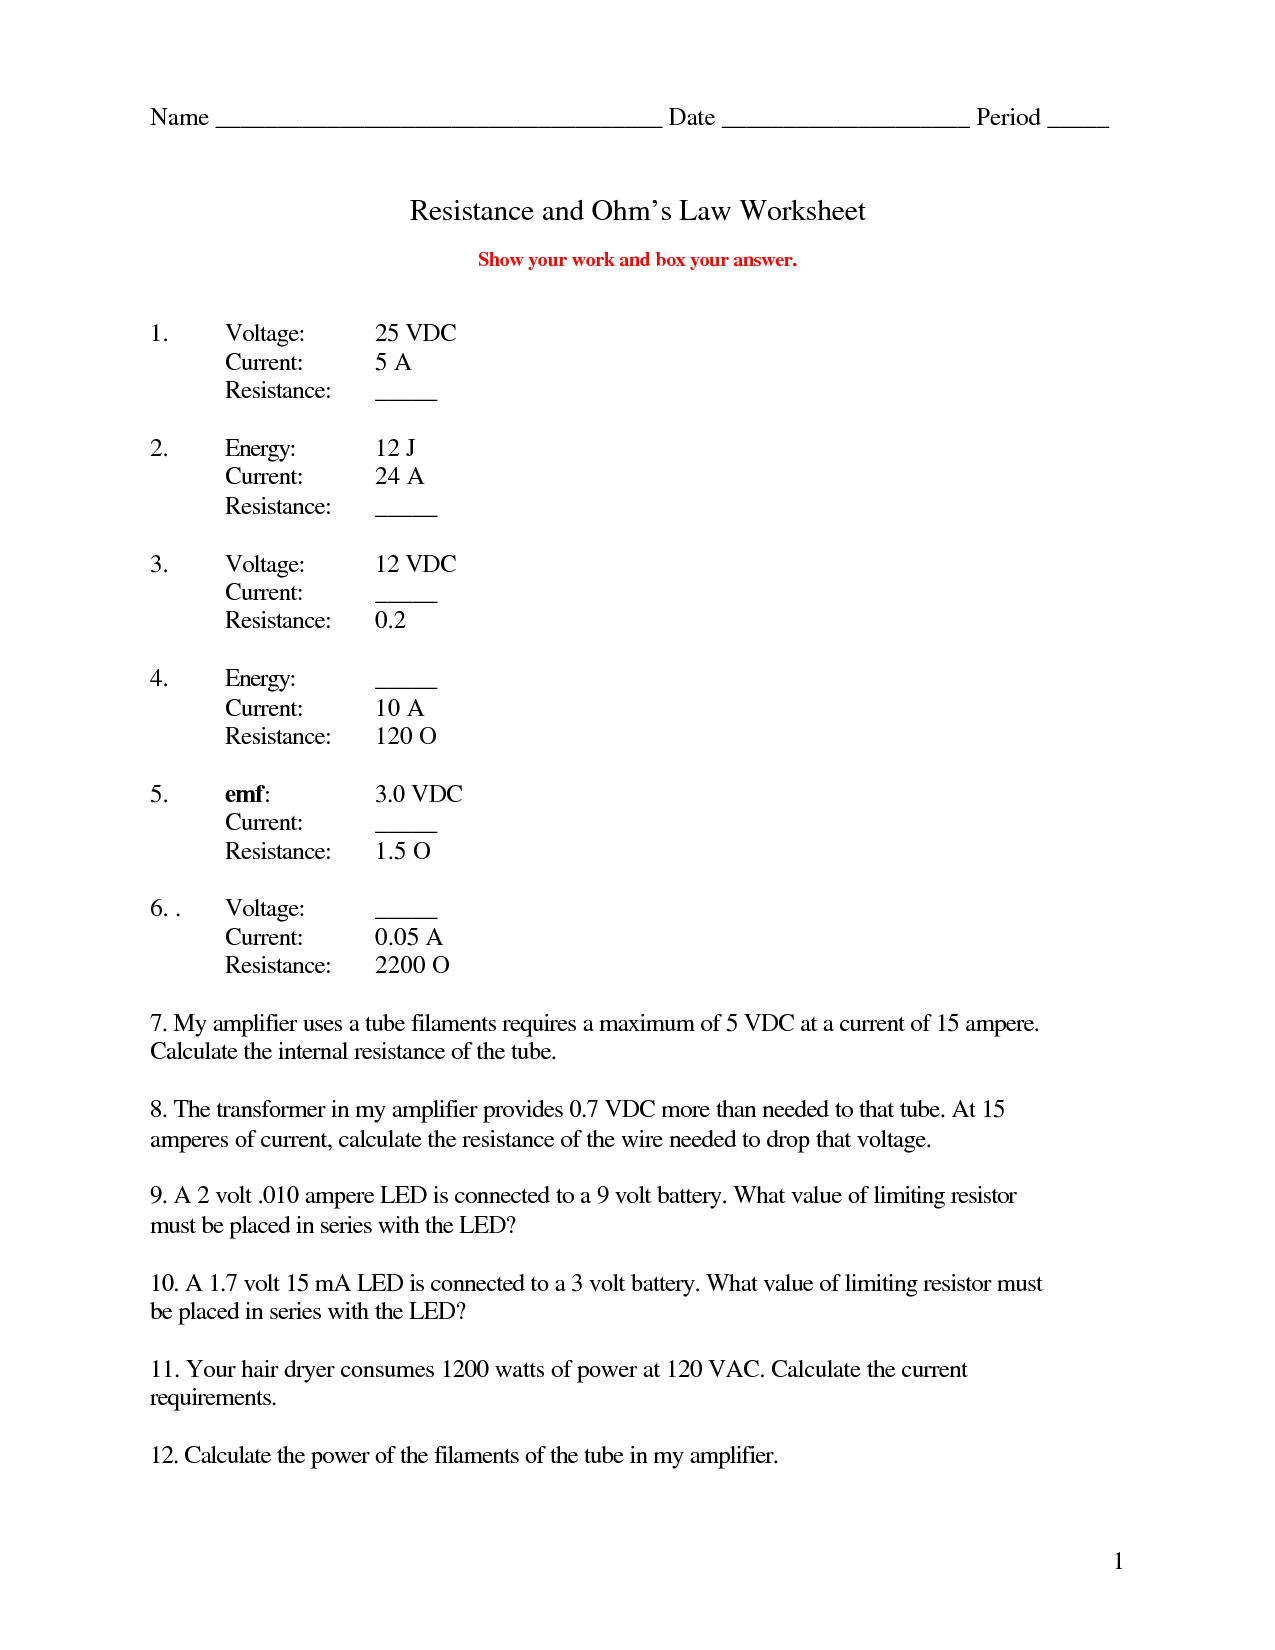 19-best-images-of-which-law-worksheet-answers-gas-laws-worksheet-answer-key-ohms-law